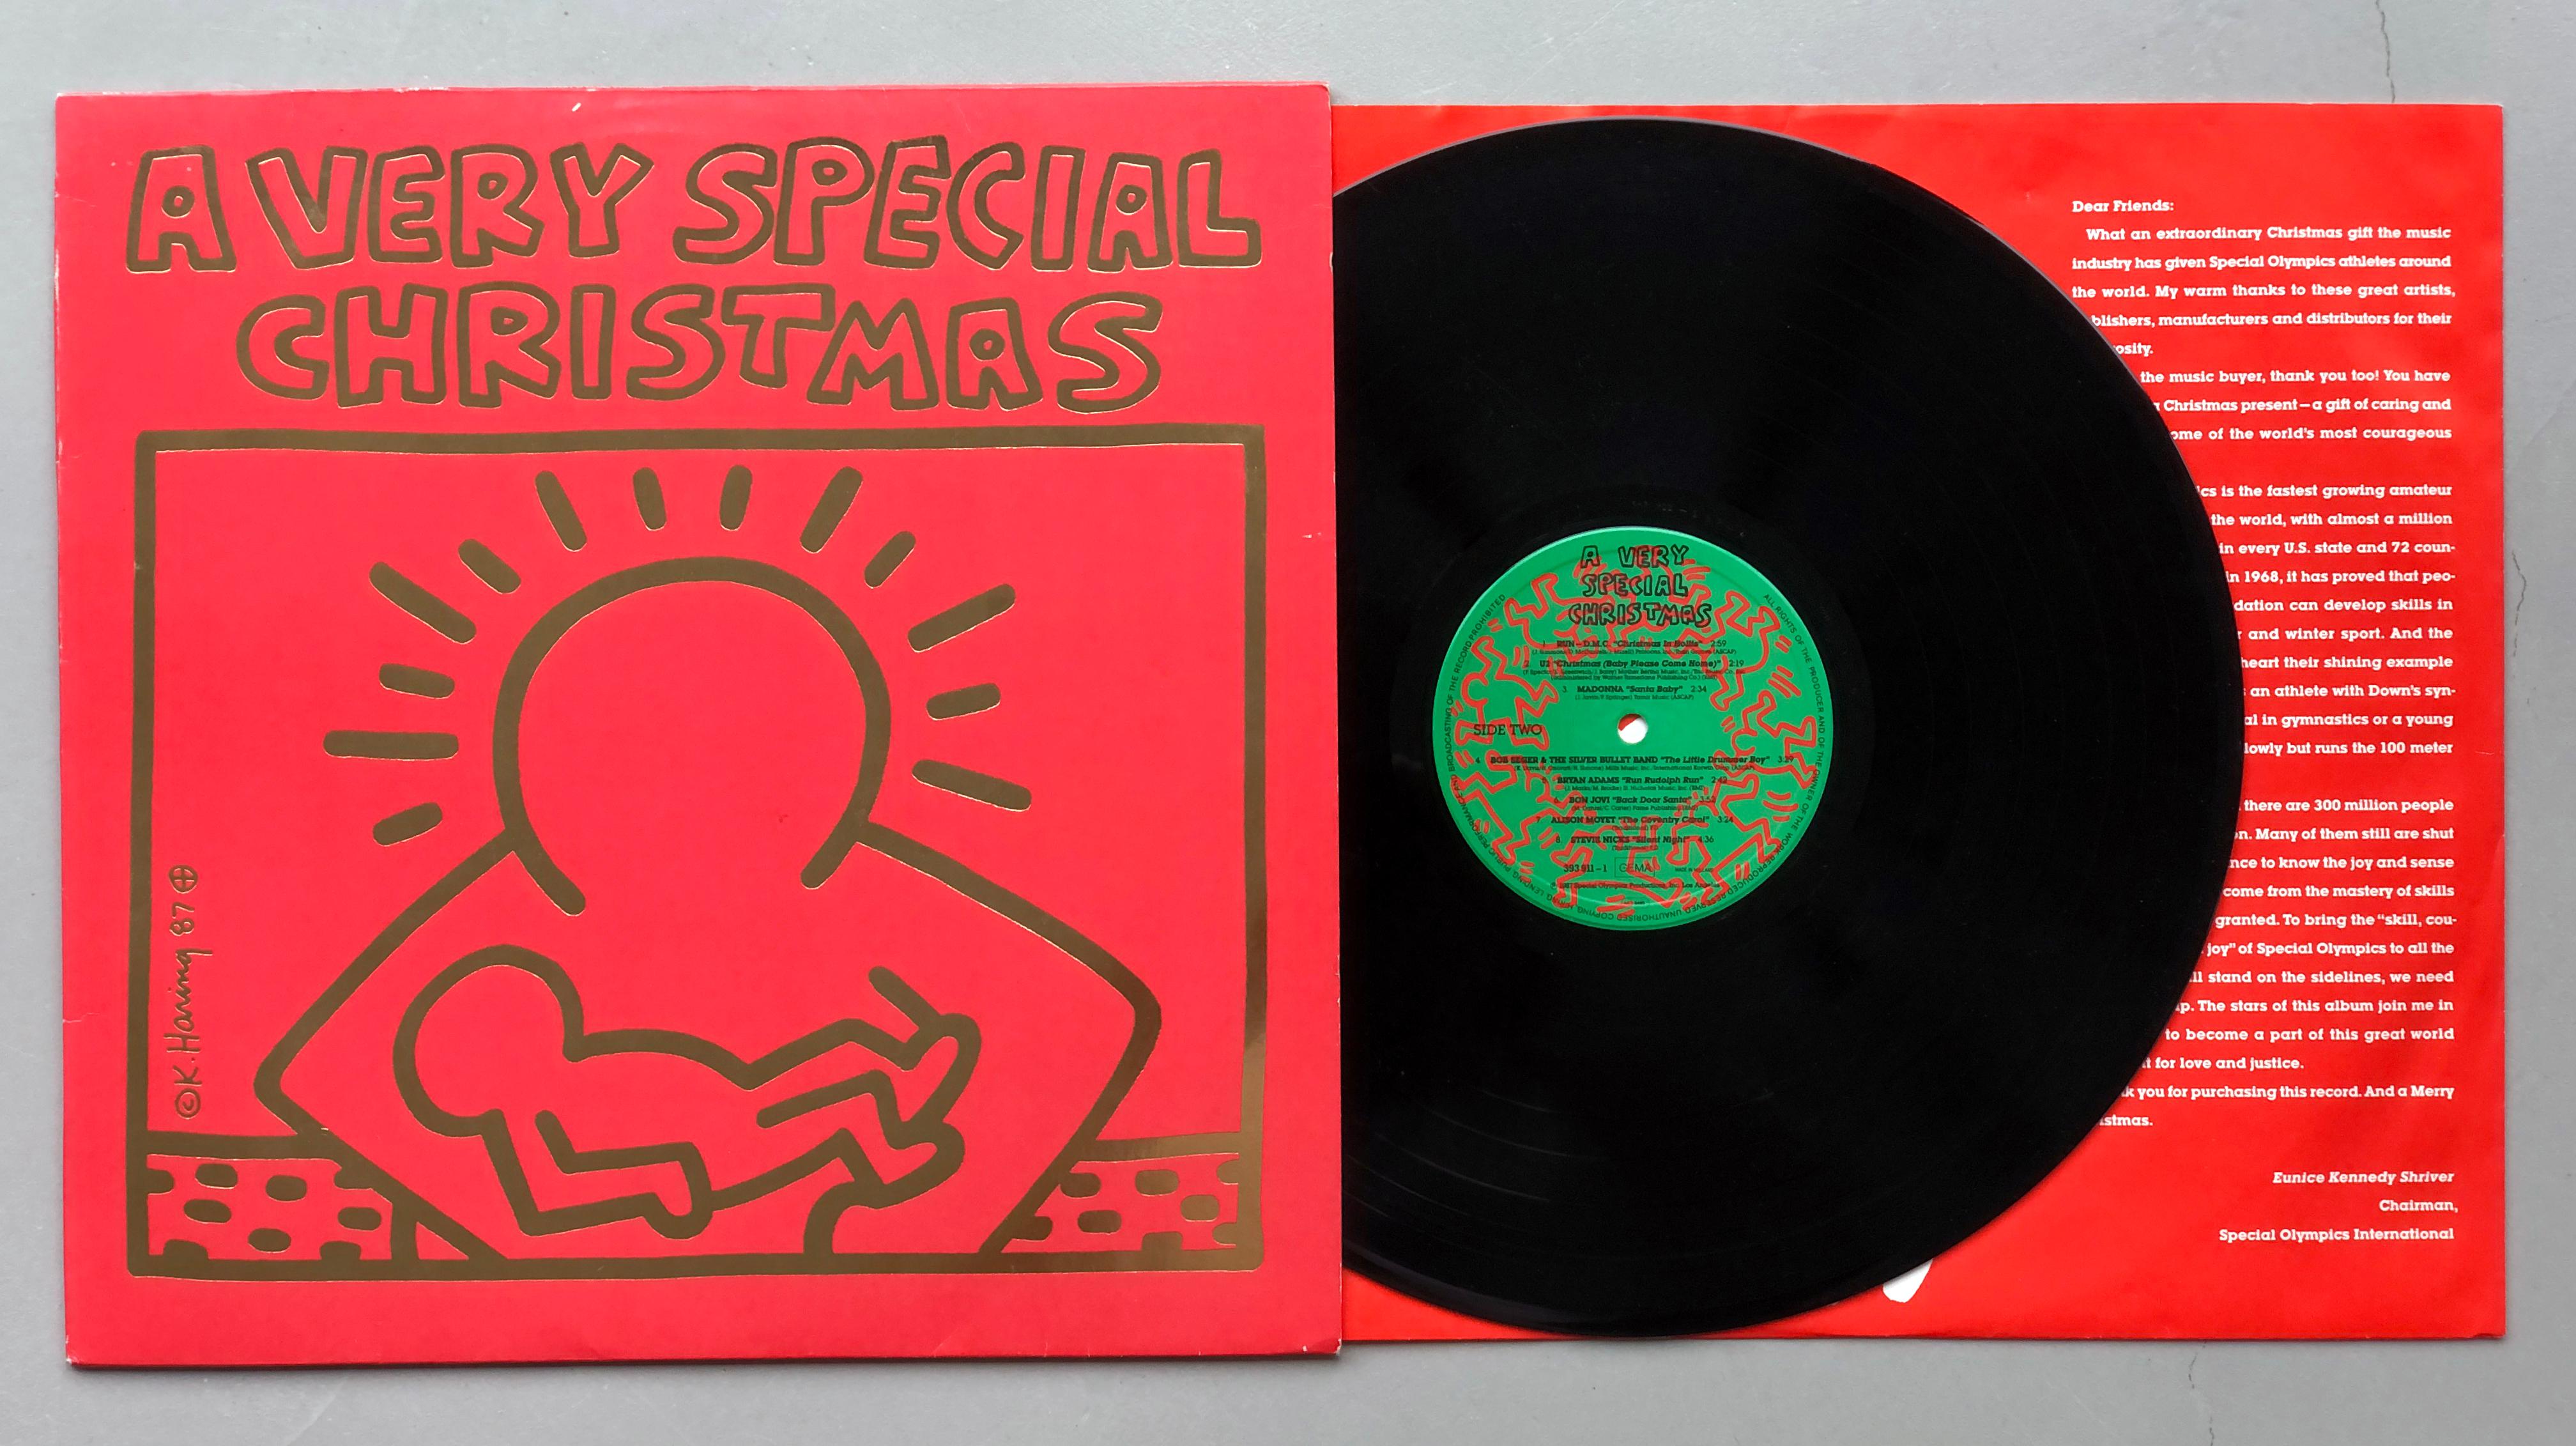 A Very Special Christmas Original 1987 first pressing Vinyl Record  For Sale 11